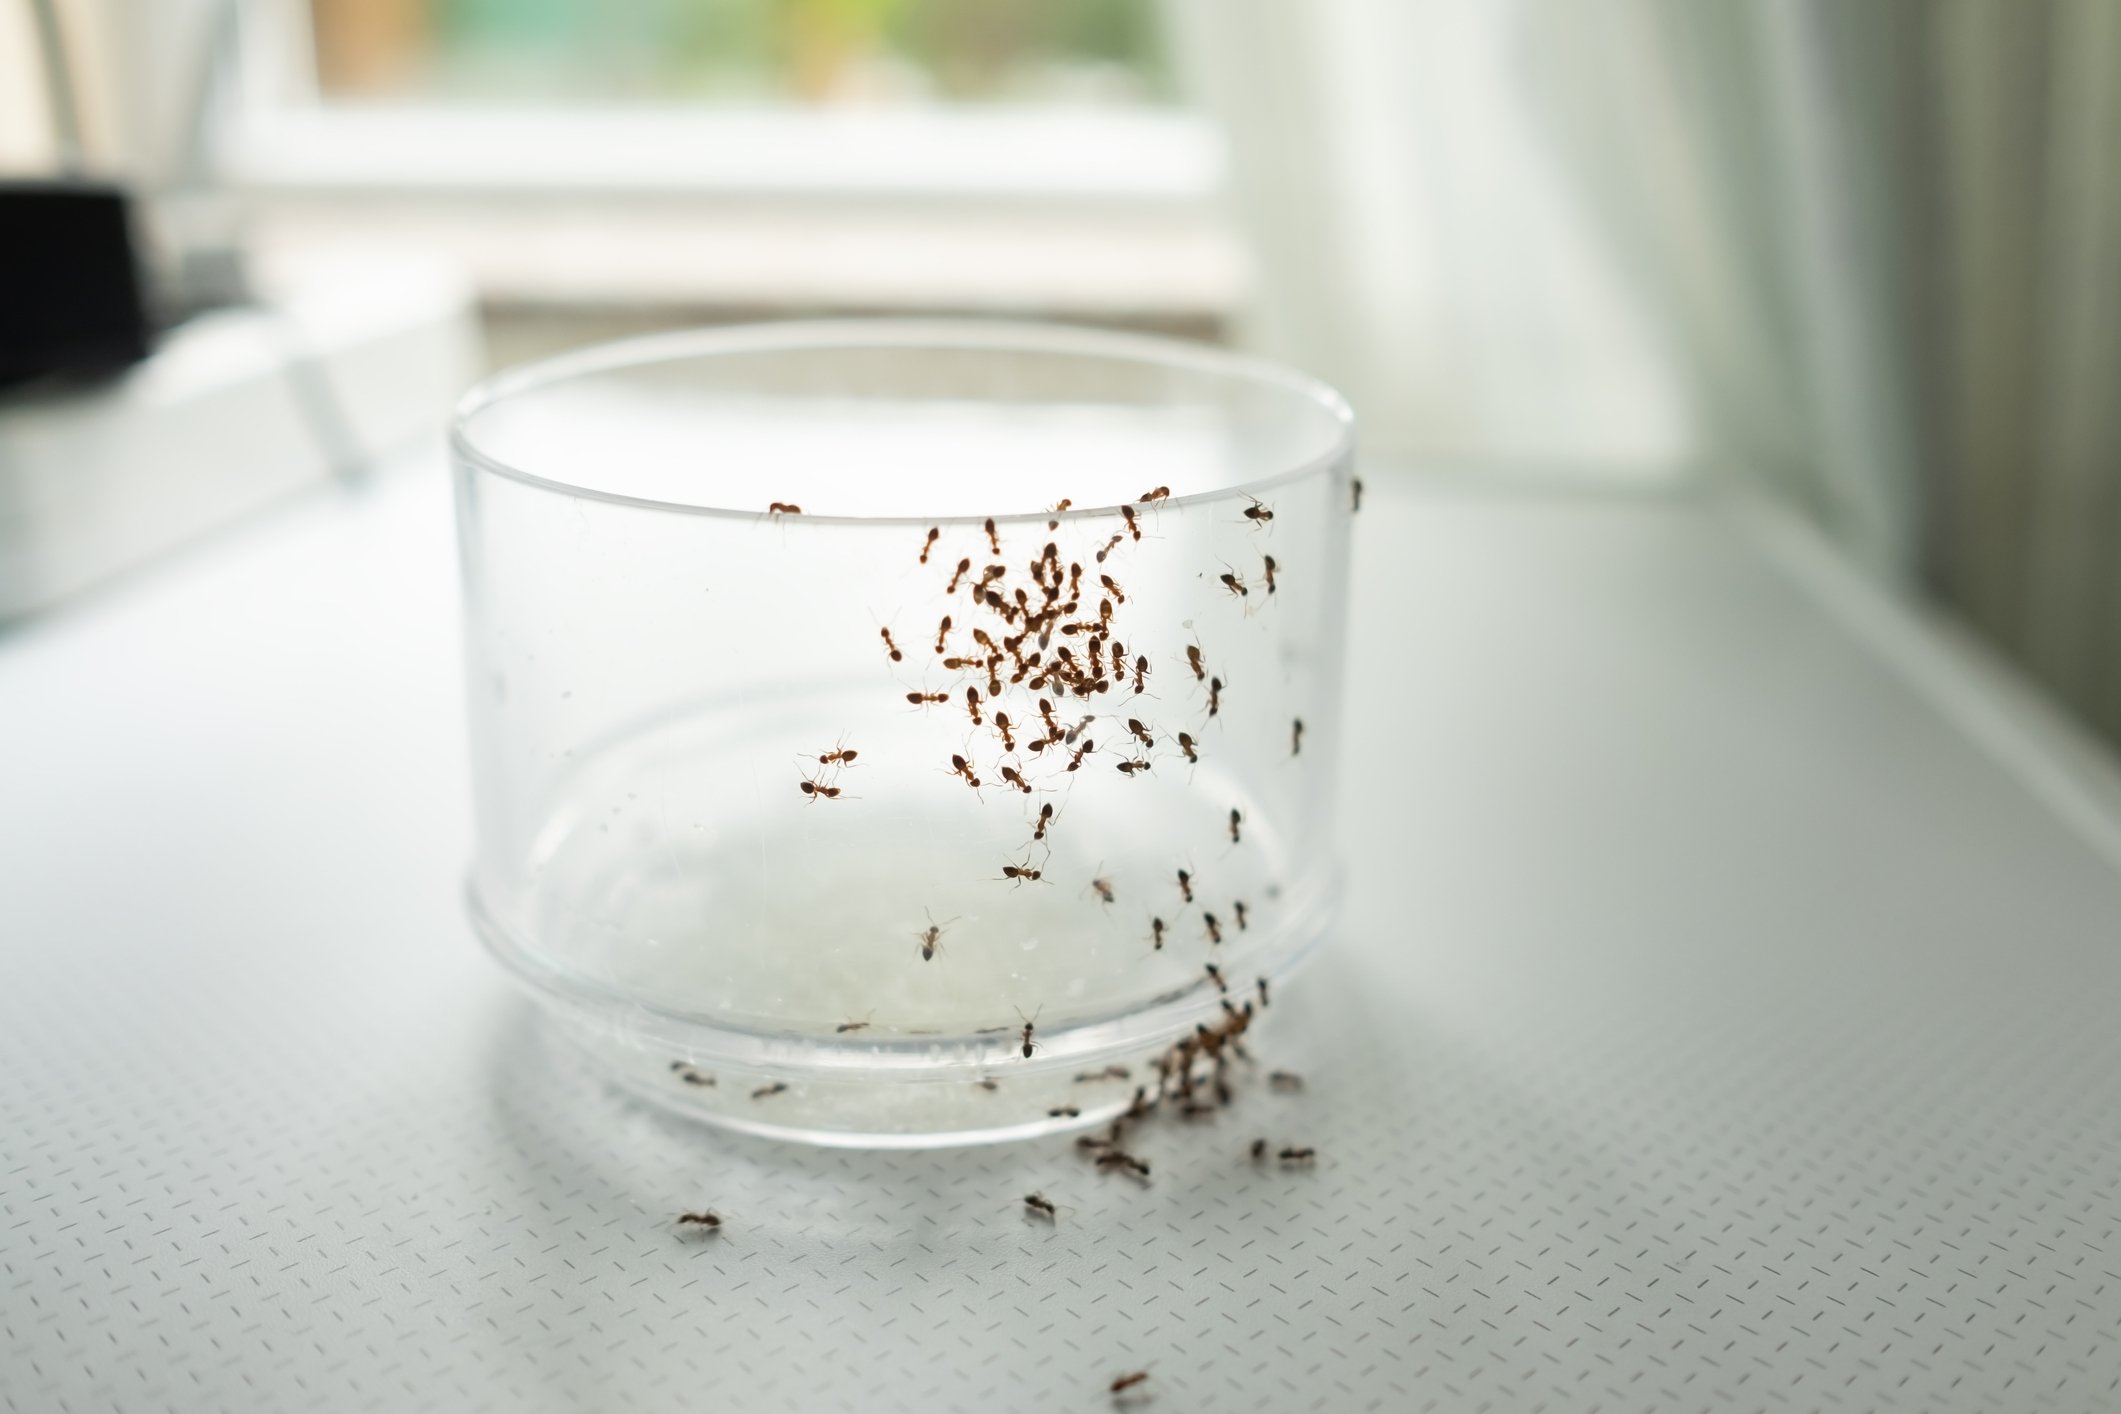 How to get rid of ants in my kitchen when living in an HOA